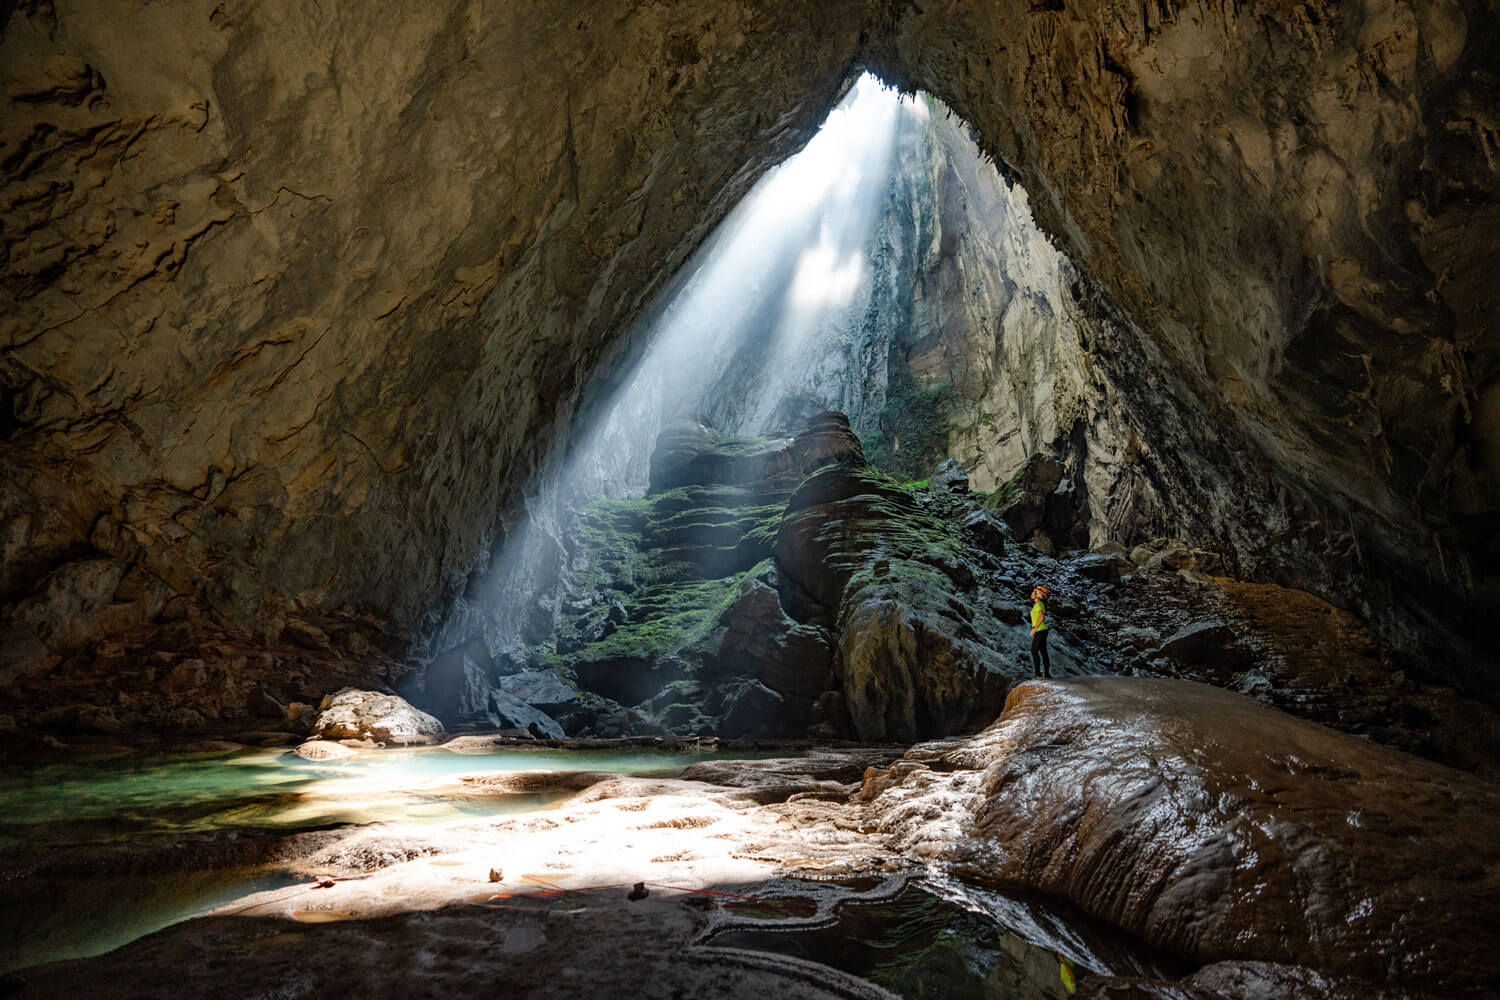 The magical scene at Son Doong cave when the sun's rays shine in.